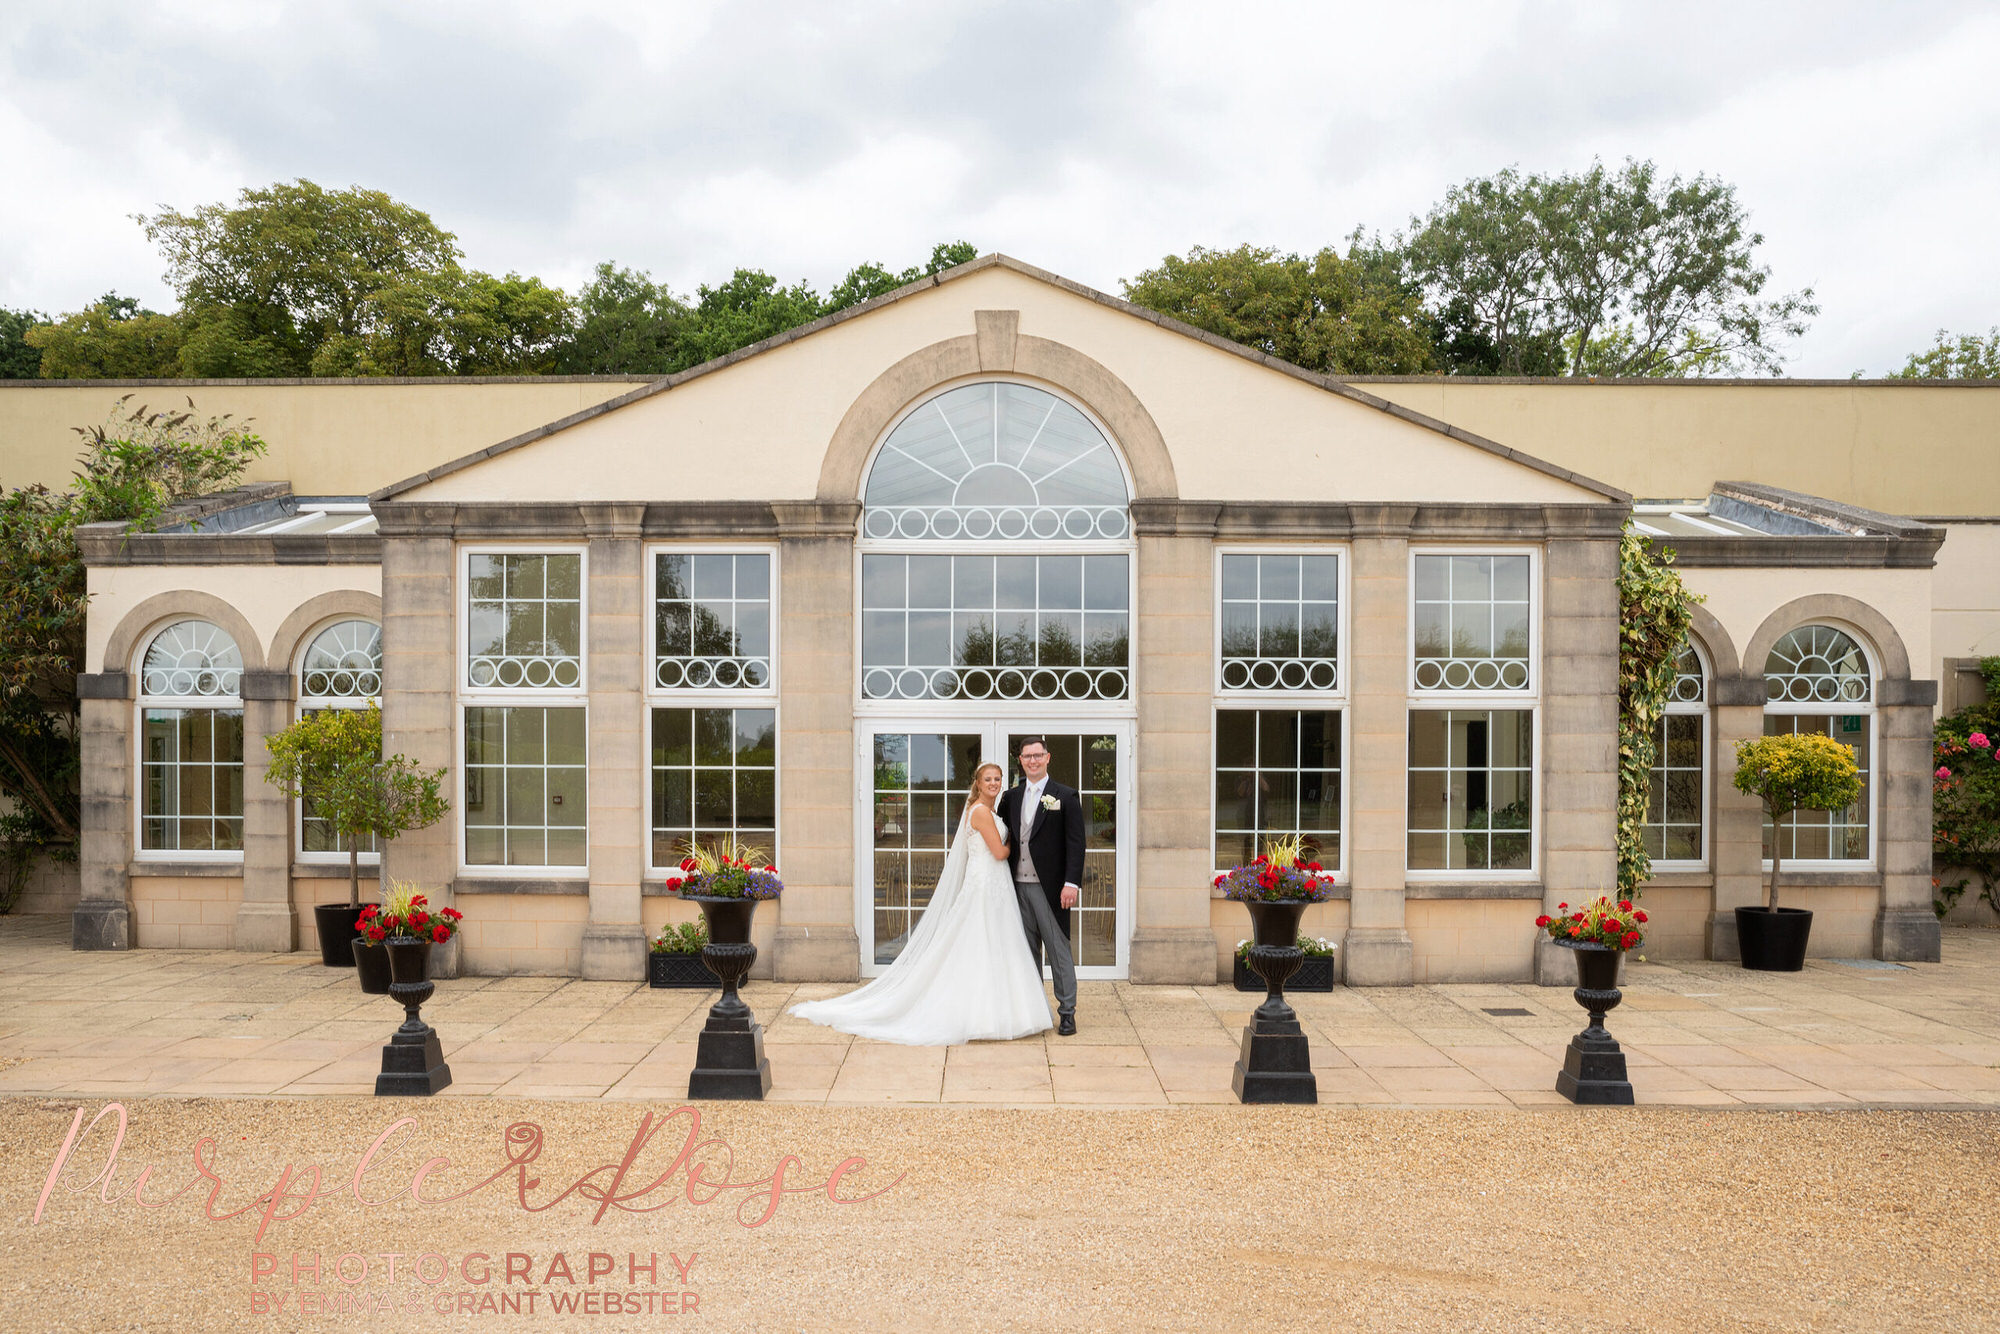 Bride and groom in front of an orangery during a photoshoot on their wedding day in Northampton